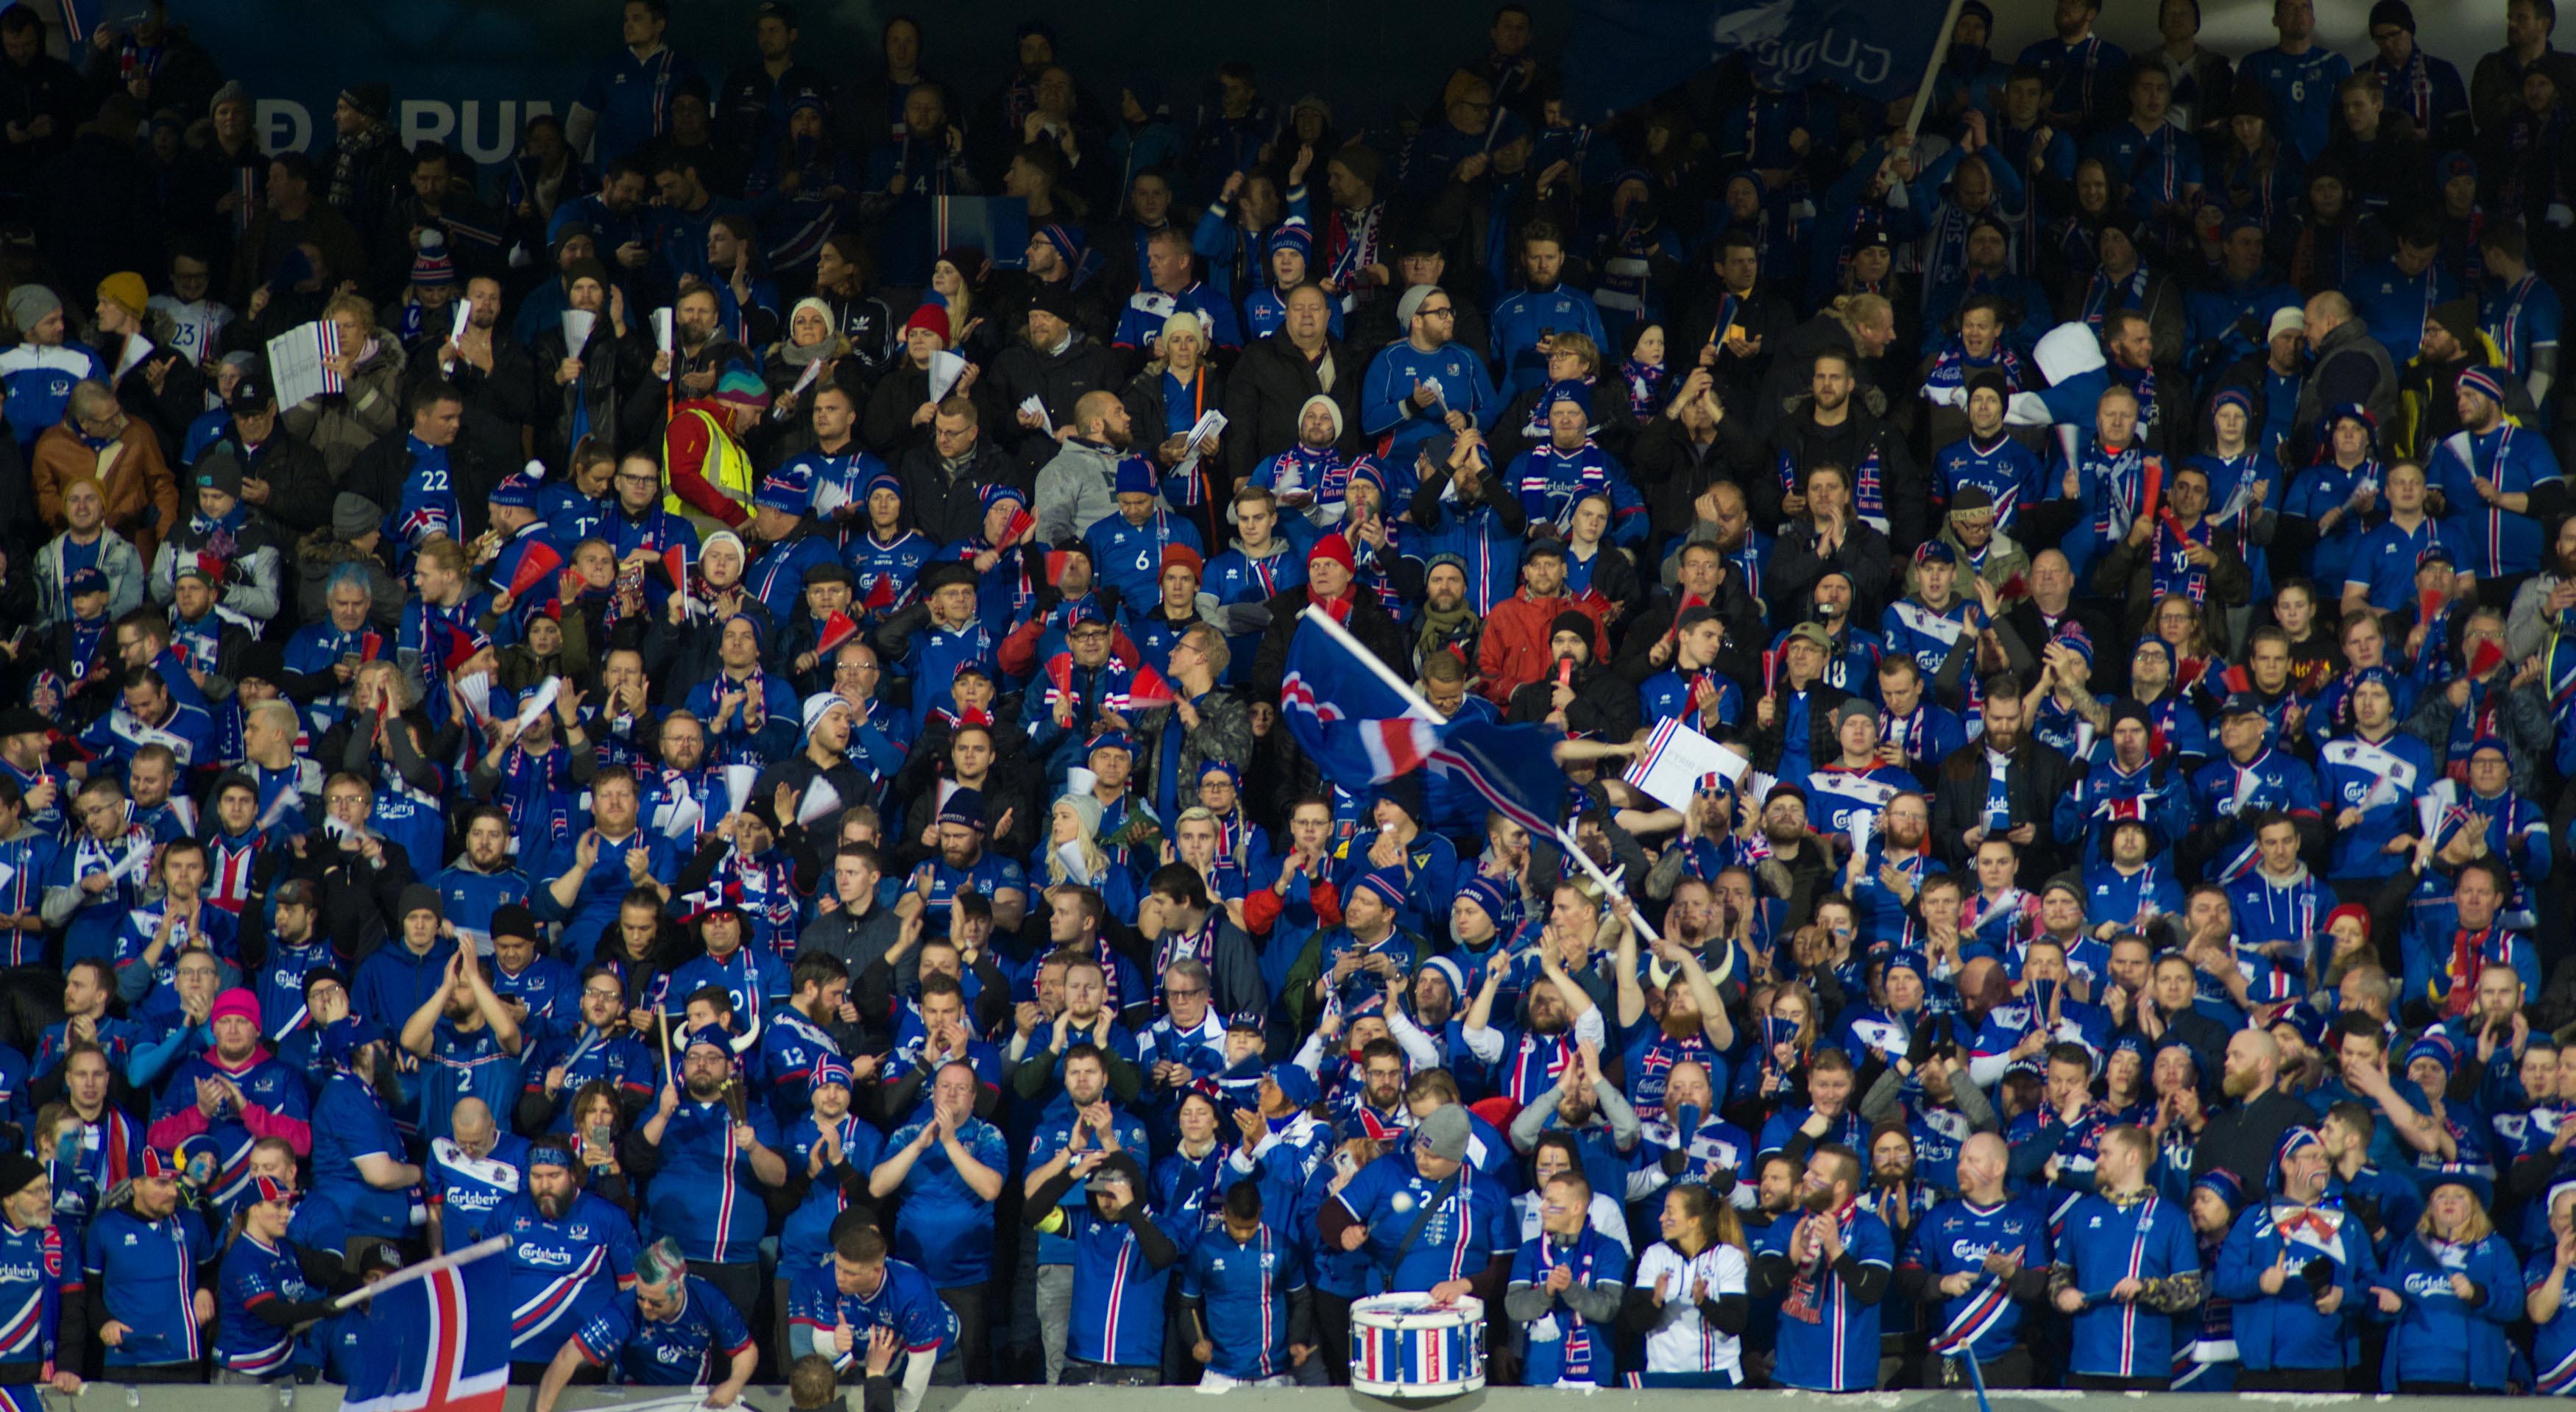 Iceland fans celebrate during the 2018 World Cup Europe Qualification match between Iceland and Kosovo, in Laugardalsvollur, Reykjavik, Iceland, on October 9, 2017. Photo: Reuters